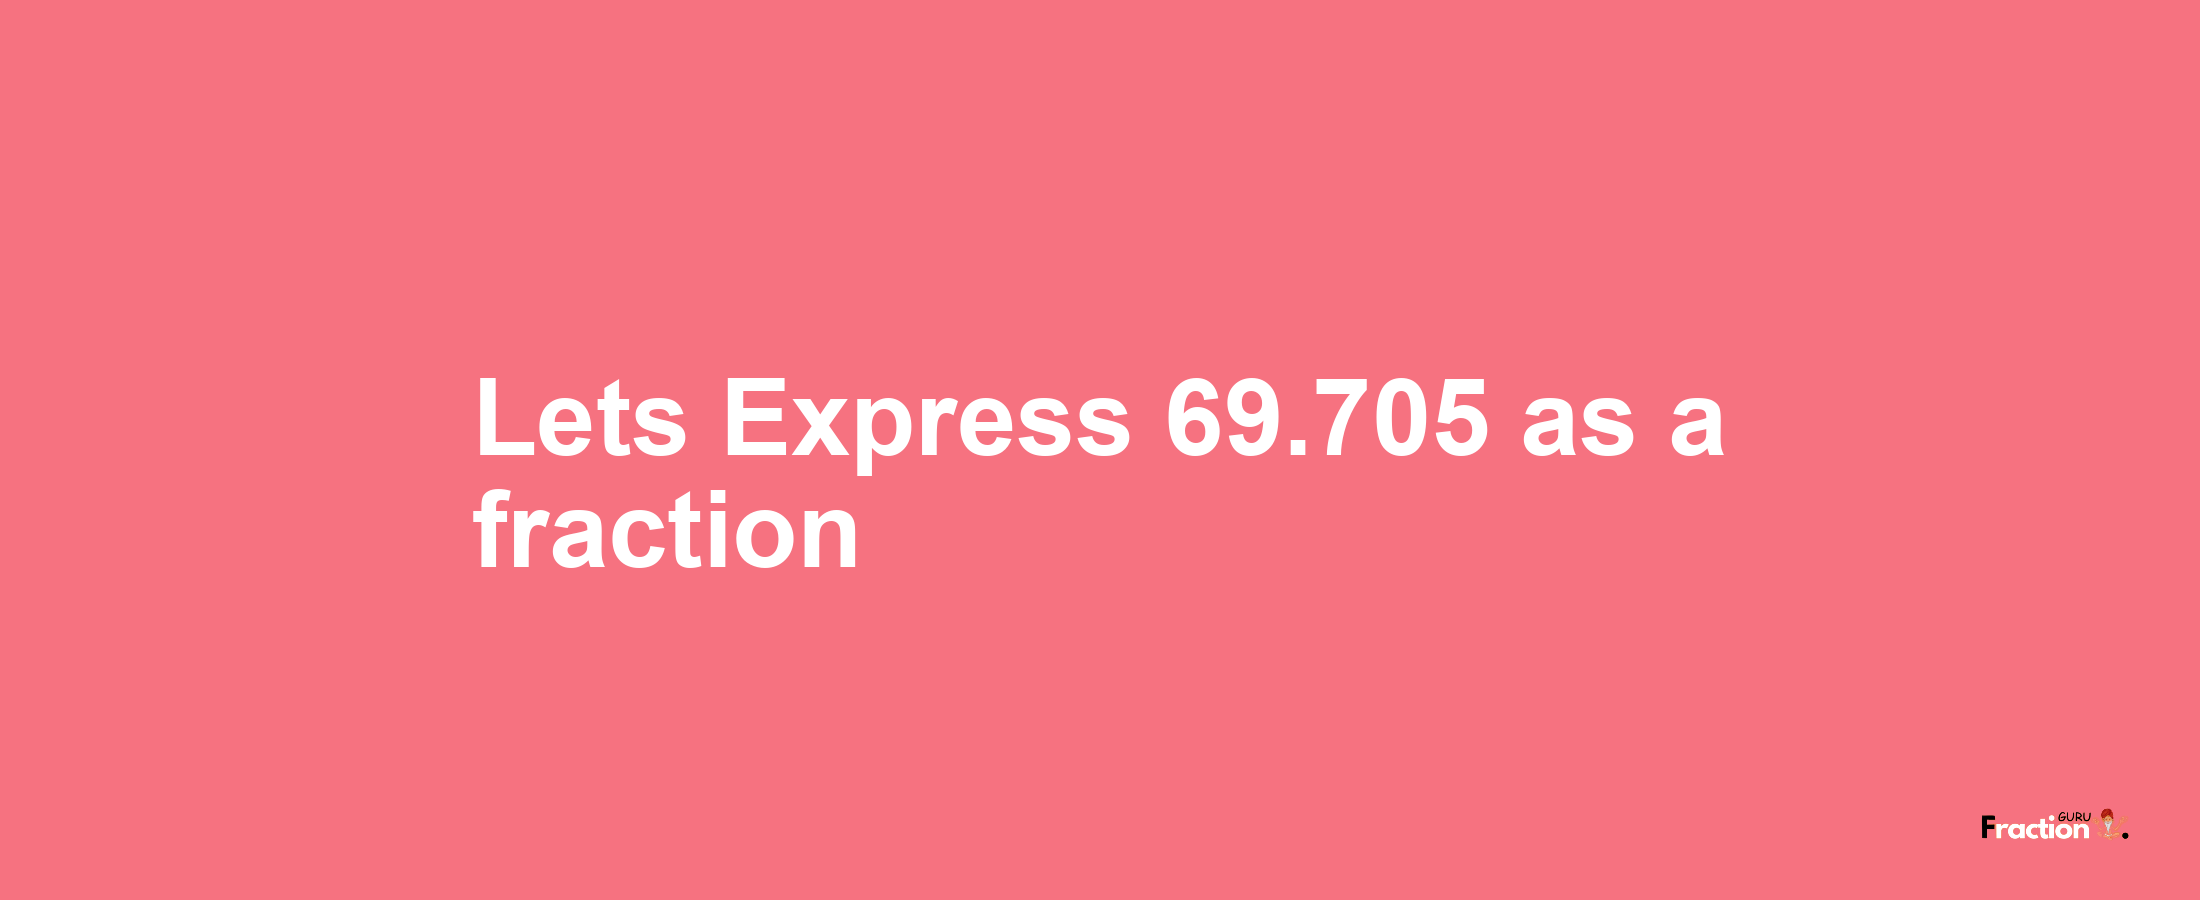 Lets Express 69.705 as afraction